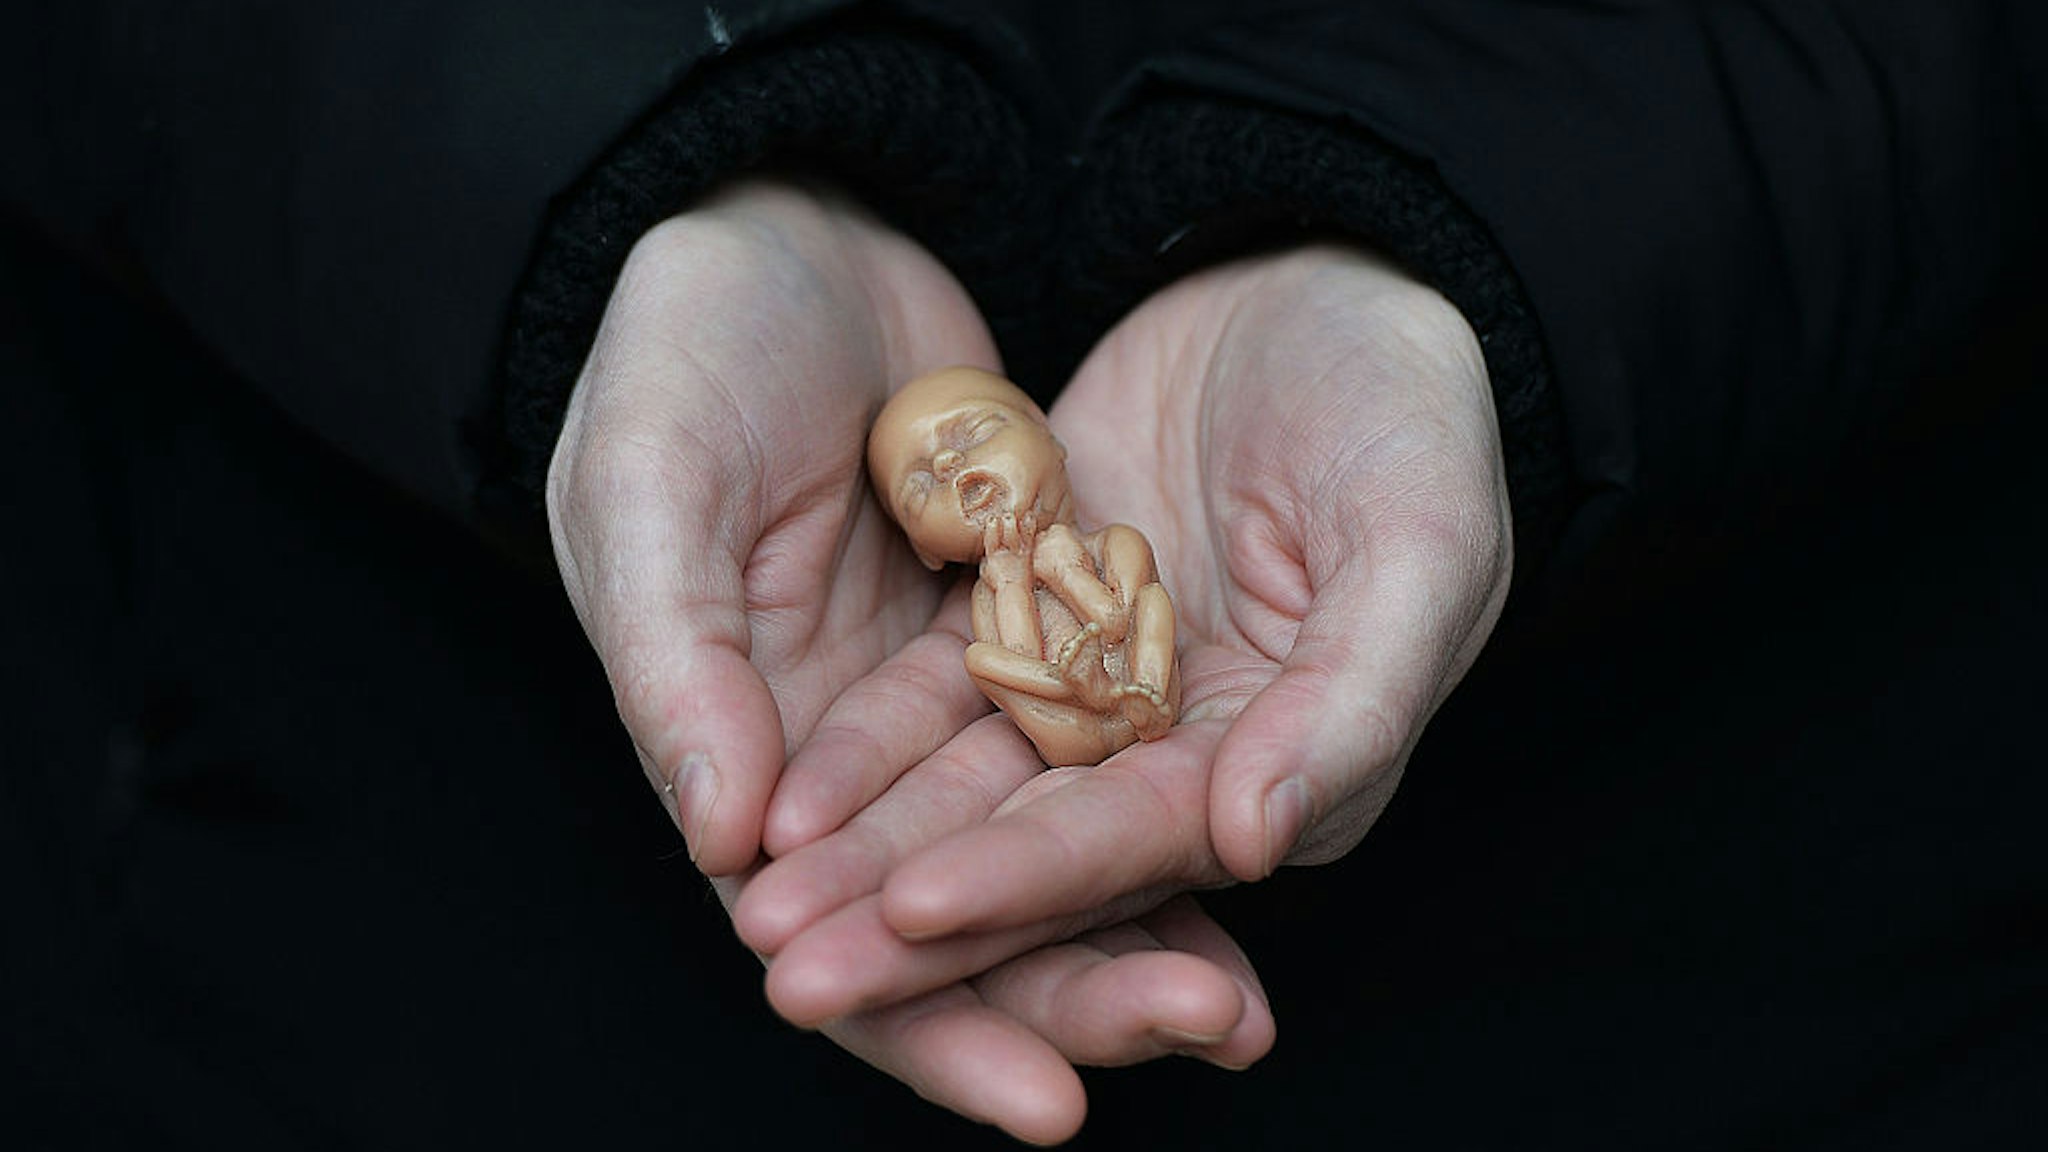 BELFAST, NORTHERN IRELAND - APRIL 07: A Pro Life campaigner displays a plastic doll representing a 12 week old foetus as she stands outside the Marie Stopes Clinic on April 7, 2016 in Belfast, Northern Ireland. The anit abortion supporters have protested outside the clinic where women can go for advice concerning terminating their pregnancy since it opened in 2012. The abortion laws in Northern Ireland are in the news again after a 21 year old Northern Irish woman was convicted and sentenced earlier this week for procuring a miscarriage. The woman who cannot be named for legal reasons had pleaded guilty to two charges of procuring her own abortion by using a poison and of supplying a poison with intent to procure a miscarriage, she was ten-twelve weeks pregnant at the time. She was given a three-month prison sentence by Judge David McFarland at Belfast high court, which was suspended for two years. Unlike the rest of the United Kingdom, the law in Northern Ireland rules that terminating a pregnancy is illegal except in very limited circumstances. (Photo by Charles McQuillan/Getty Images)